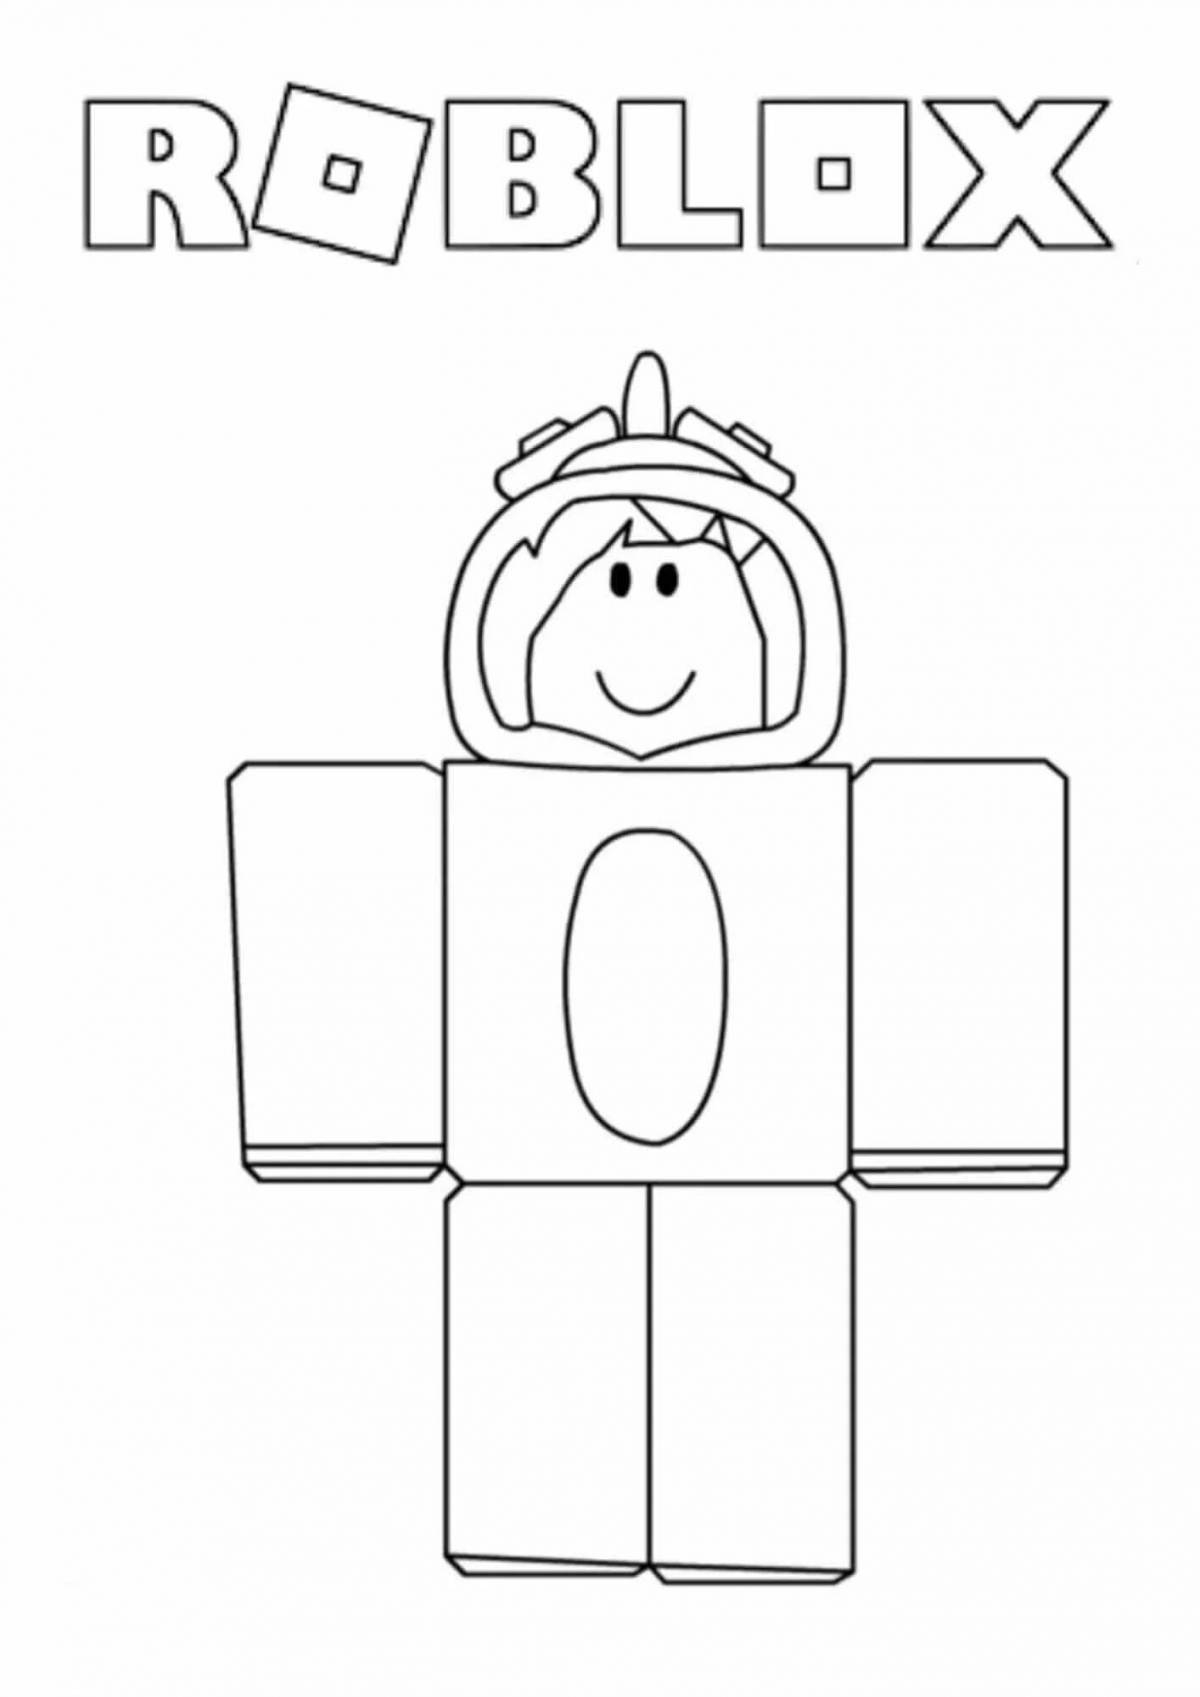 Coloring page of flawless roblox skins for girls